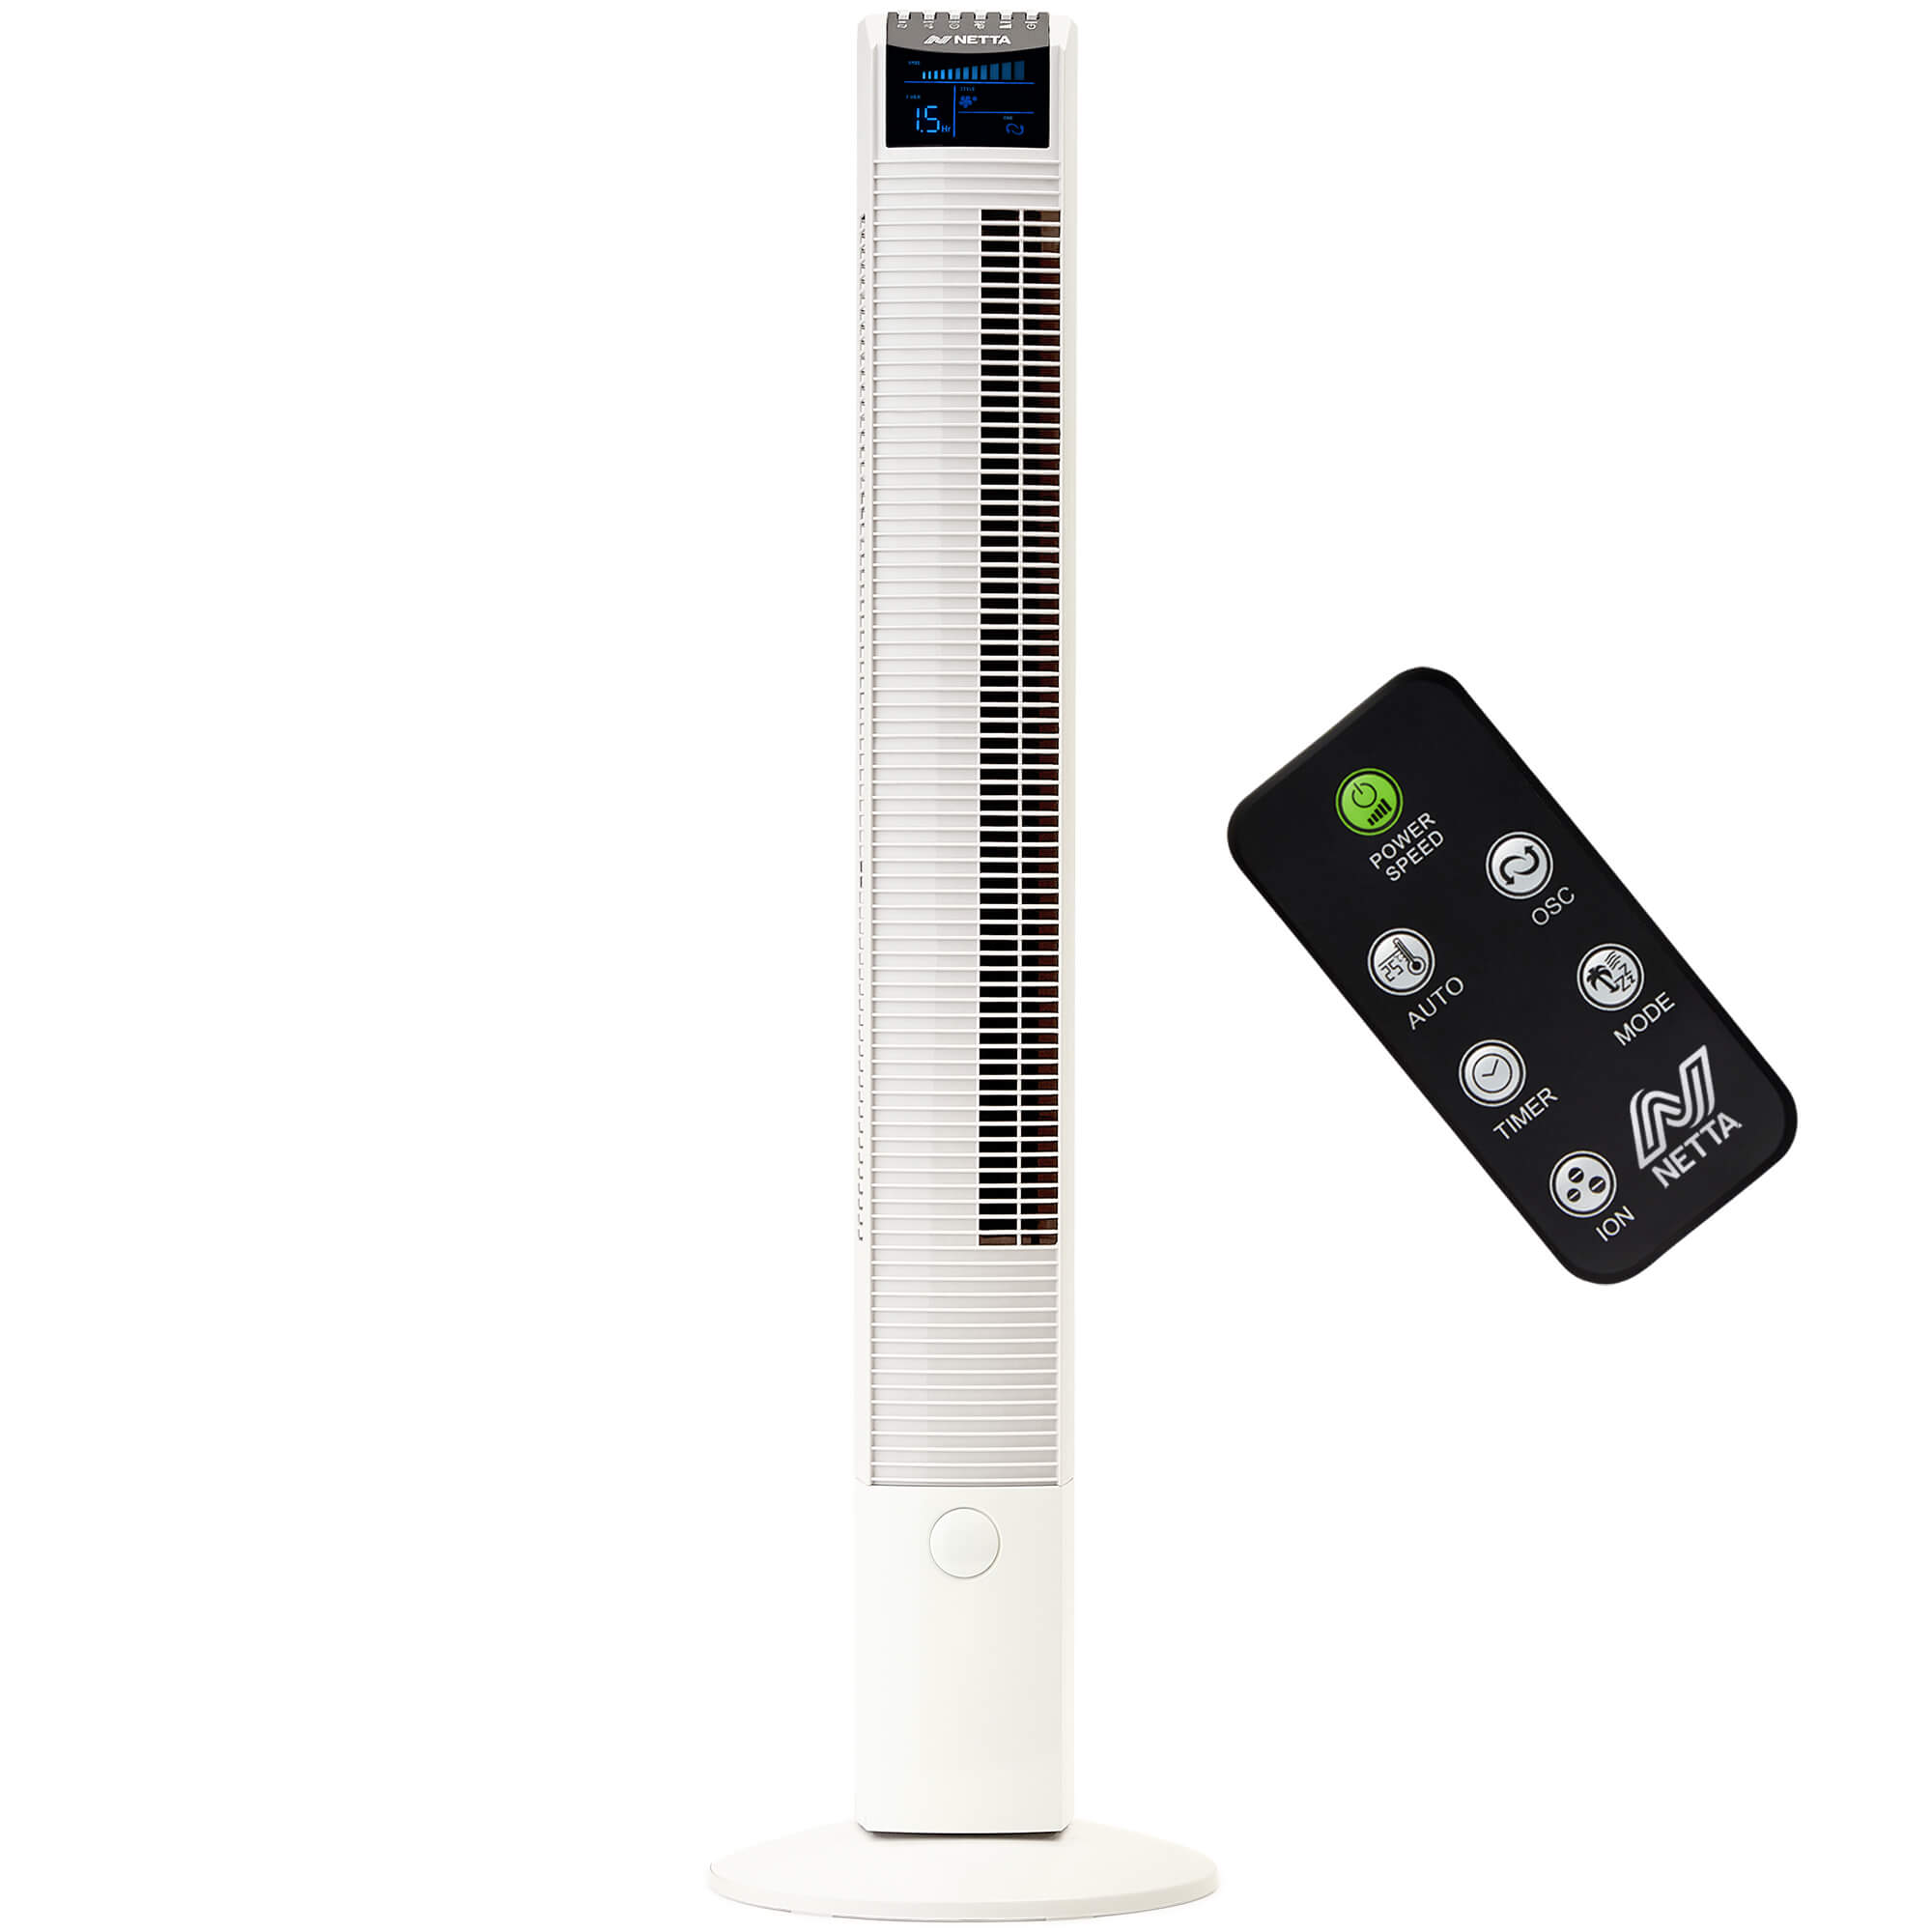 NETTA 44 Inch Tower Fan with 8-hour Timer - White